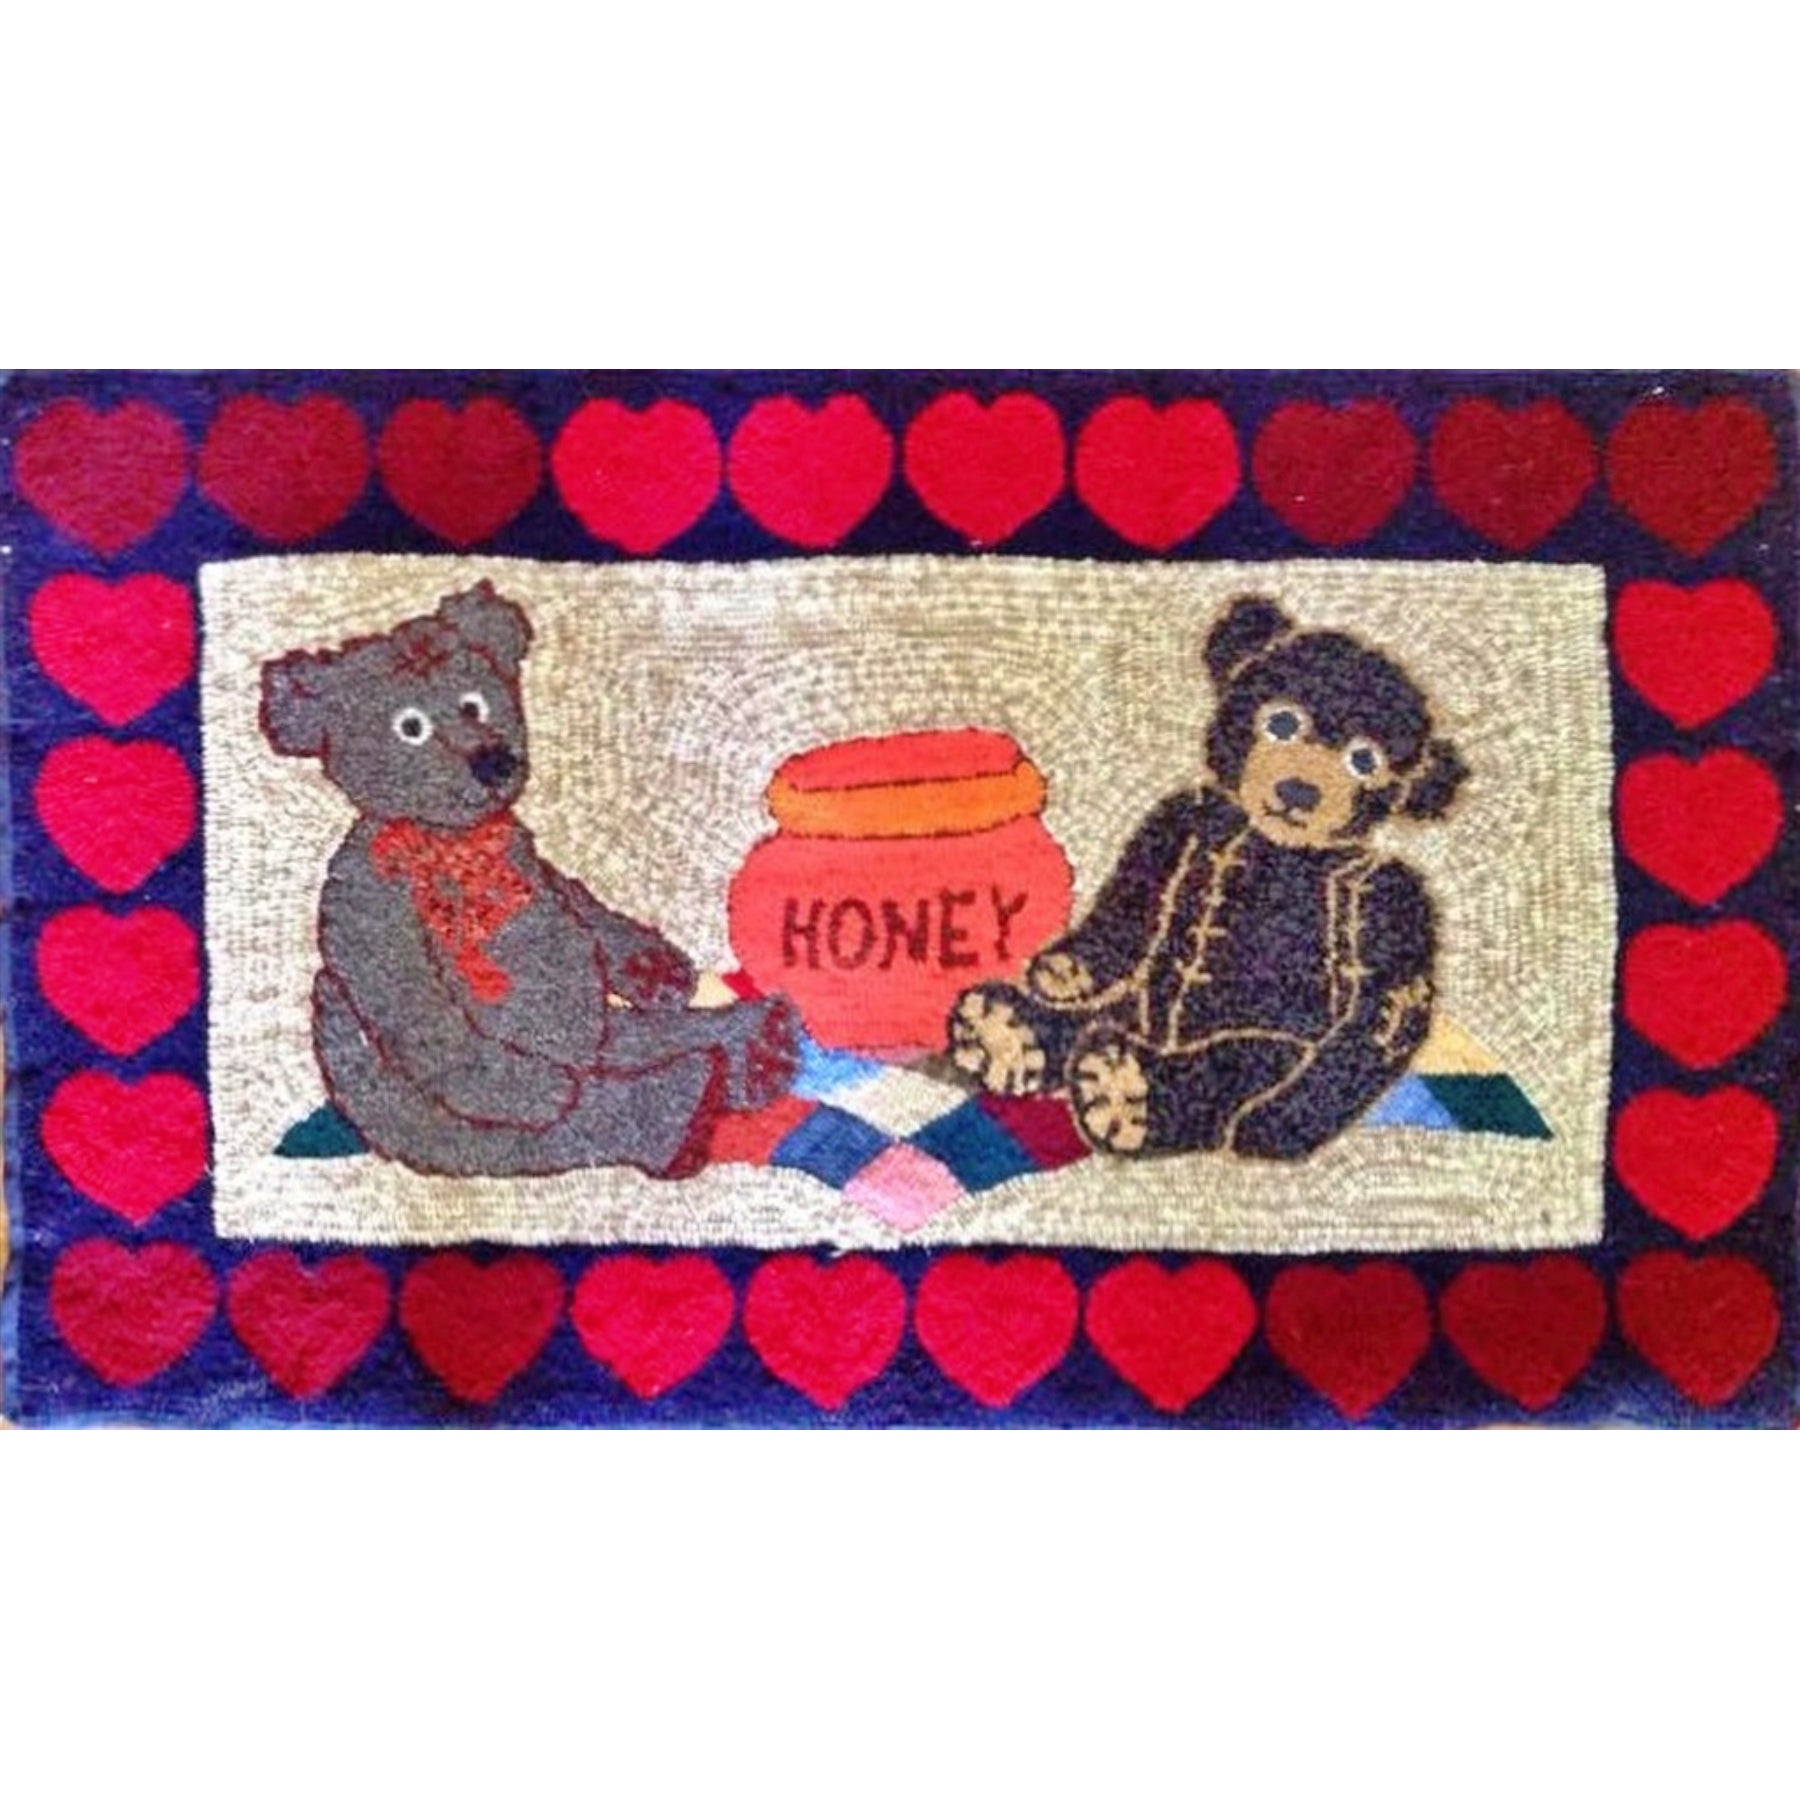 A Teddy Bears Picnic, rug hooked by Biffie Norris Gallant